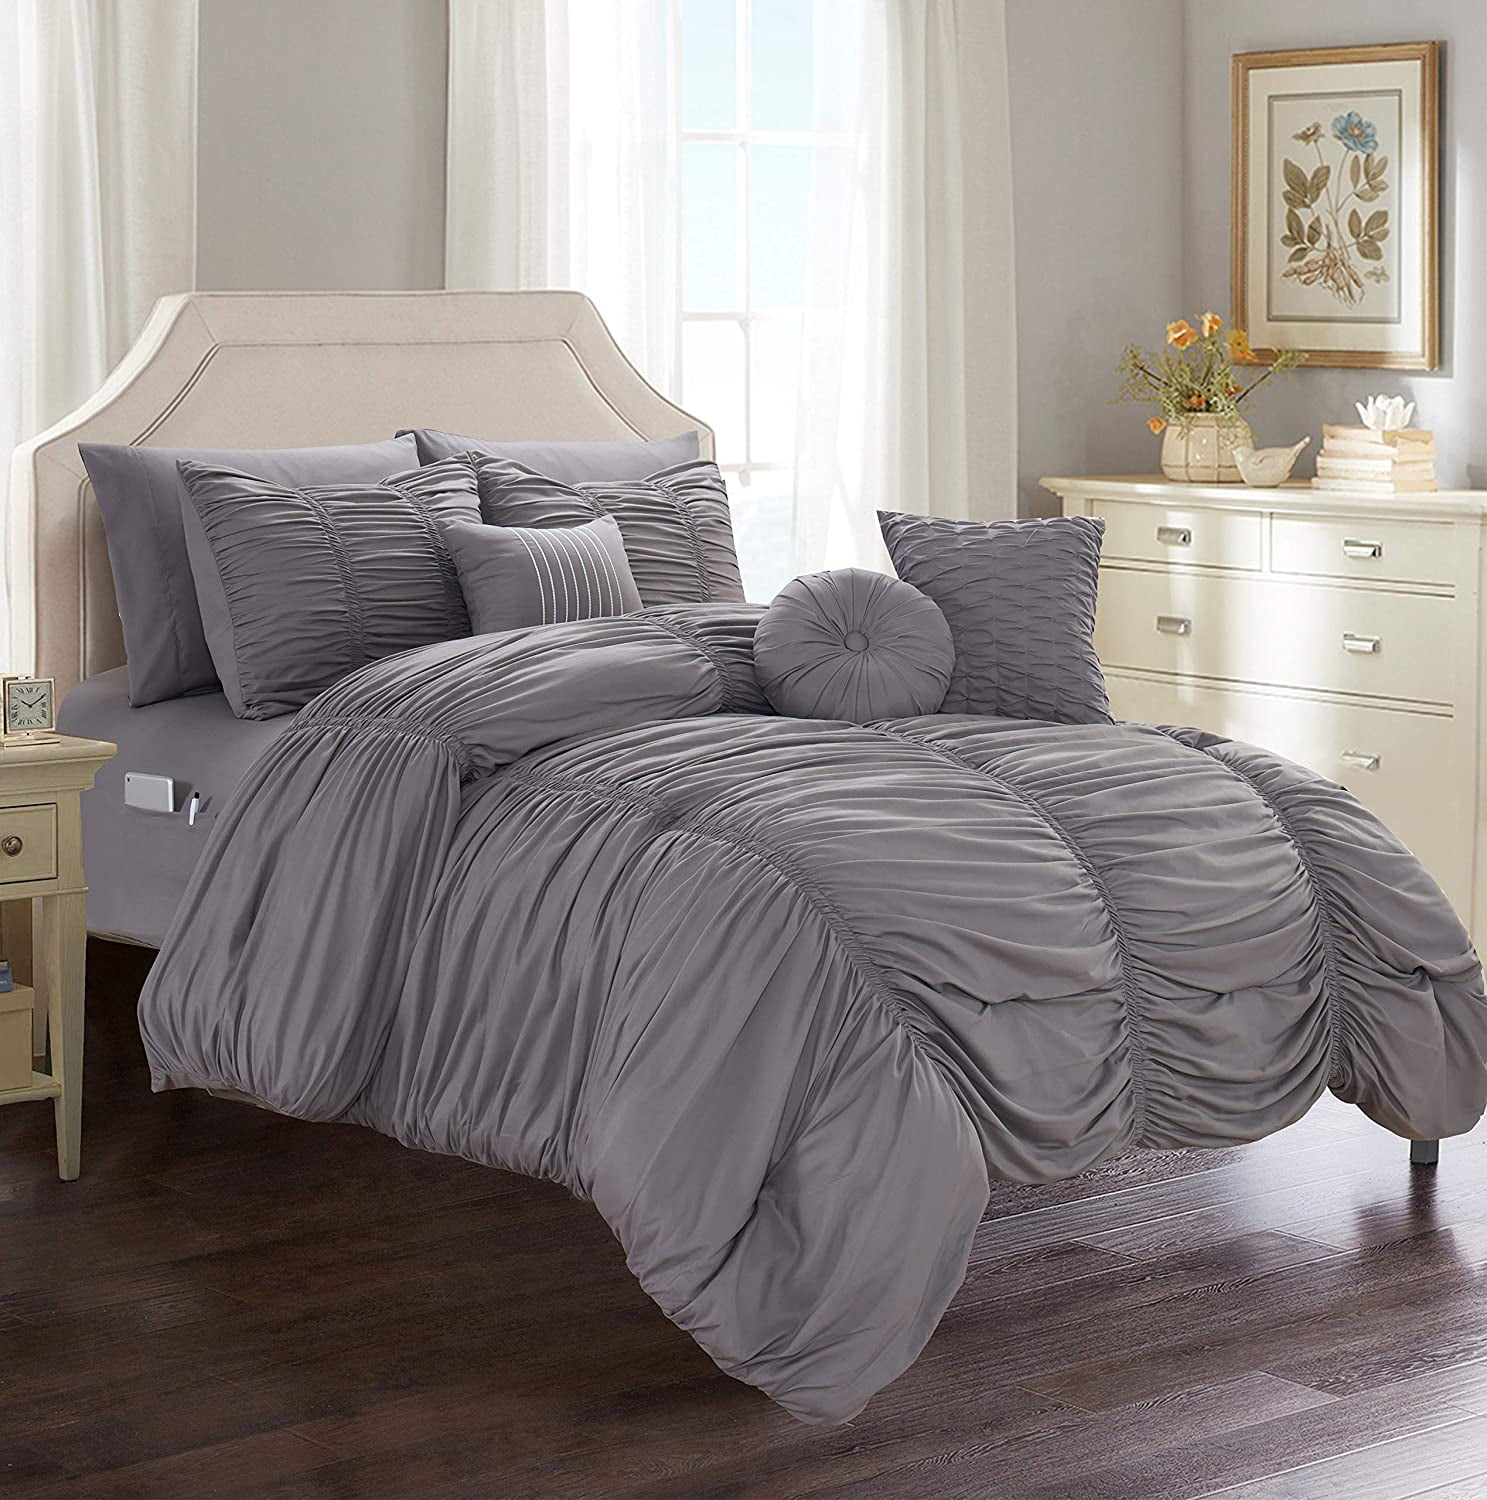 Luxurious 10 Piece Pinch Pleated ruffled and pleated complete Bed In a Bag Set. 